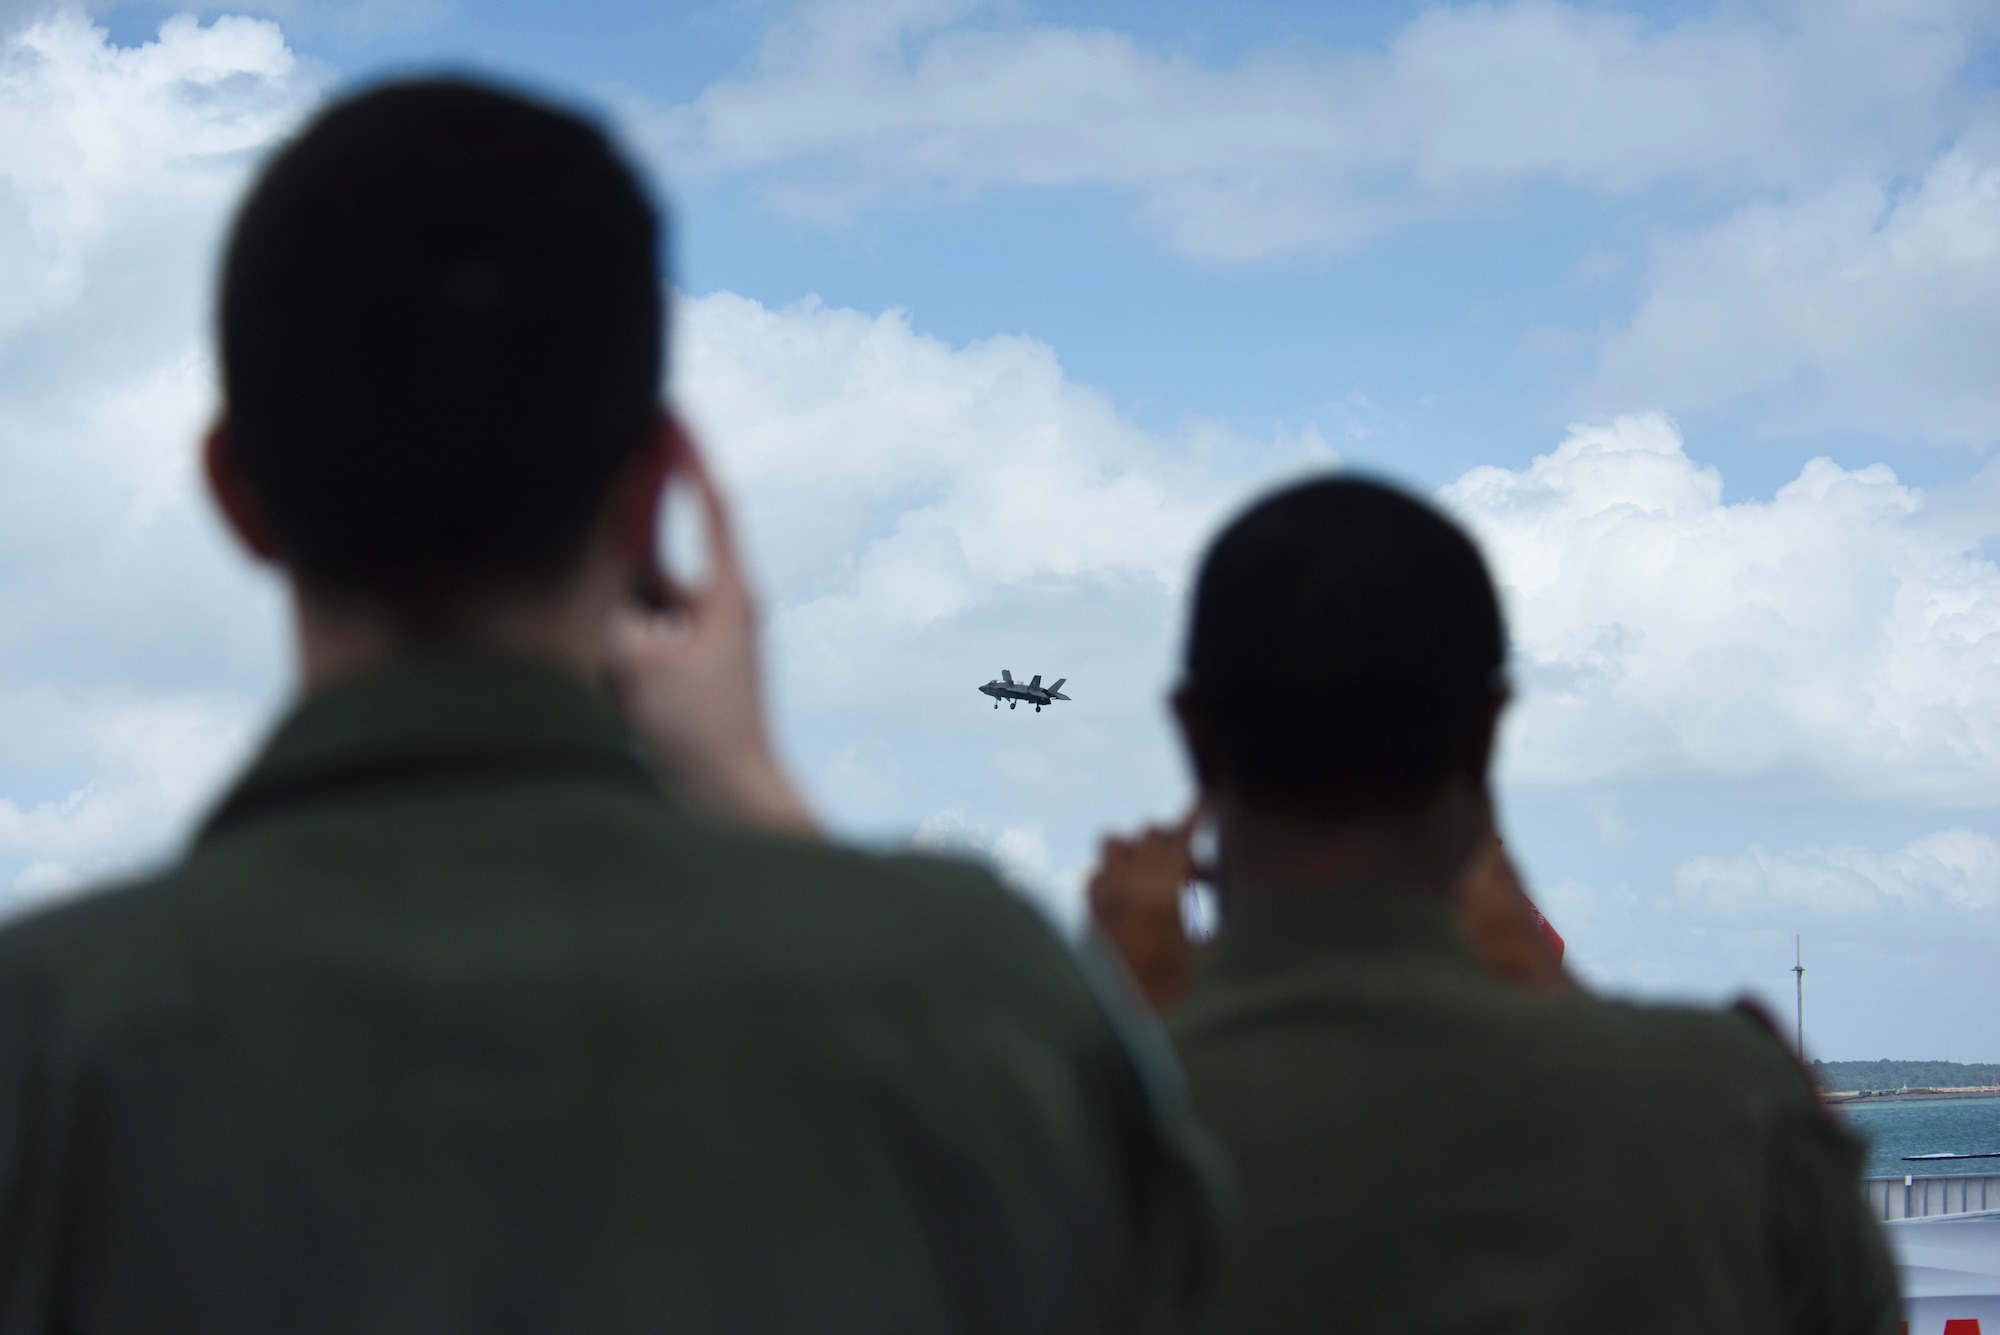 MQ-9 Reaper pilots take photos and video of an F-35 doing a demonstration at Singapore Airshow.